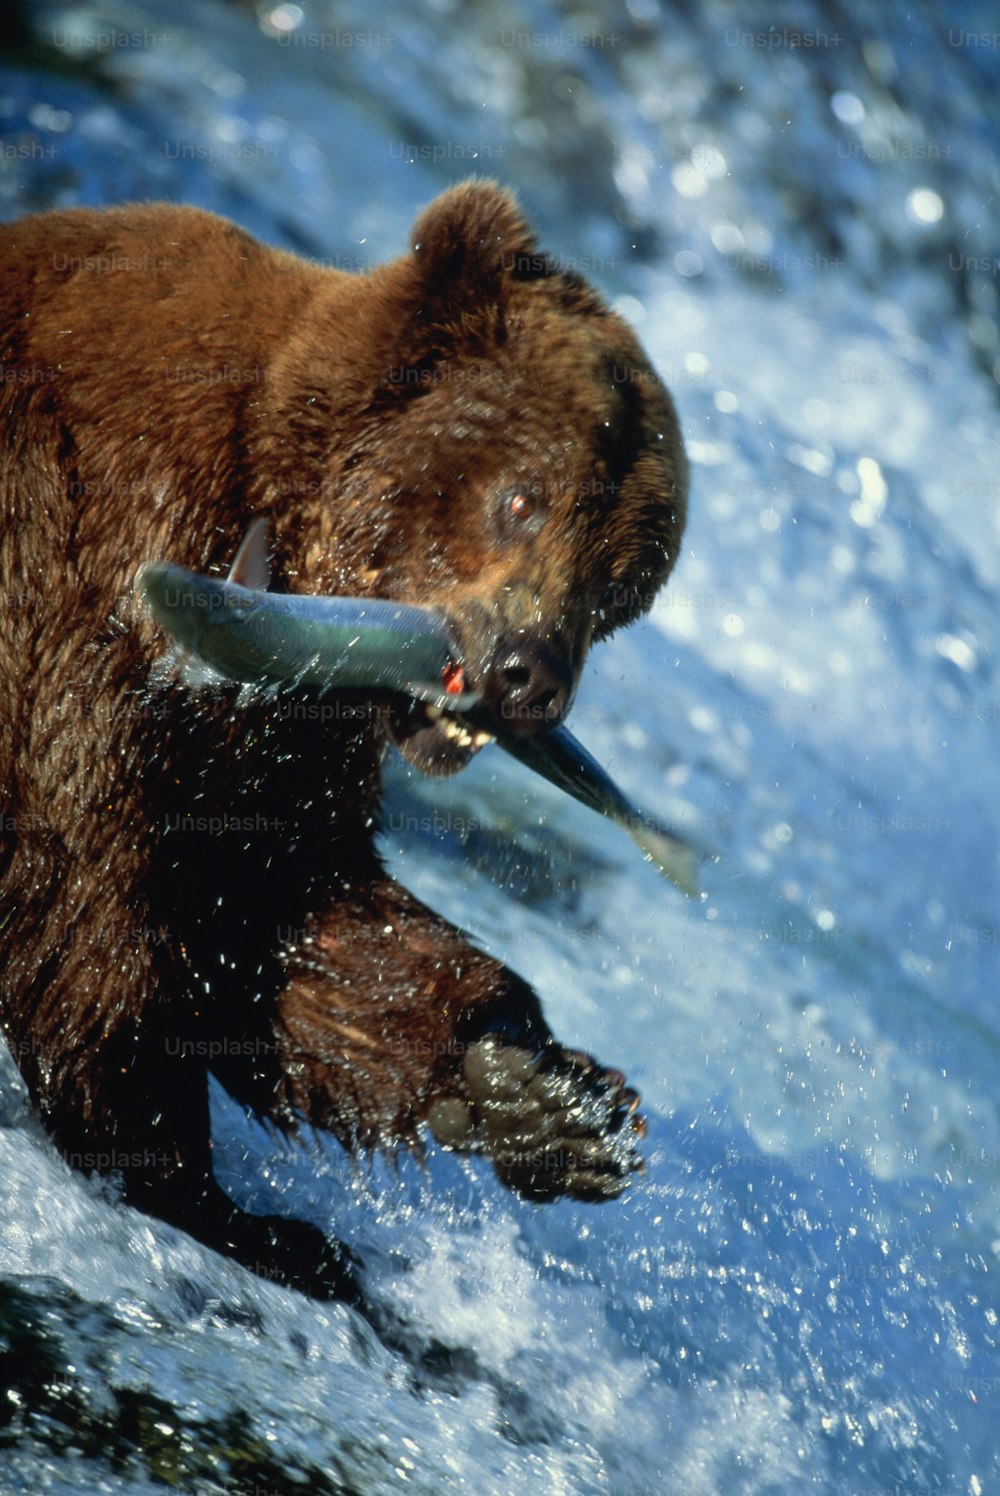 Katmai Nat. Park, Alaska (major salmon spawning ground). Other common name: Grizzly bear. Sometimes classified as sub-species Ursus arctos horribilis. Native to Northwest America, Alaska, Canada and Russia, isolated populations in Europe.